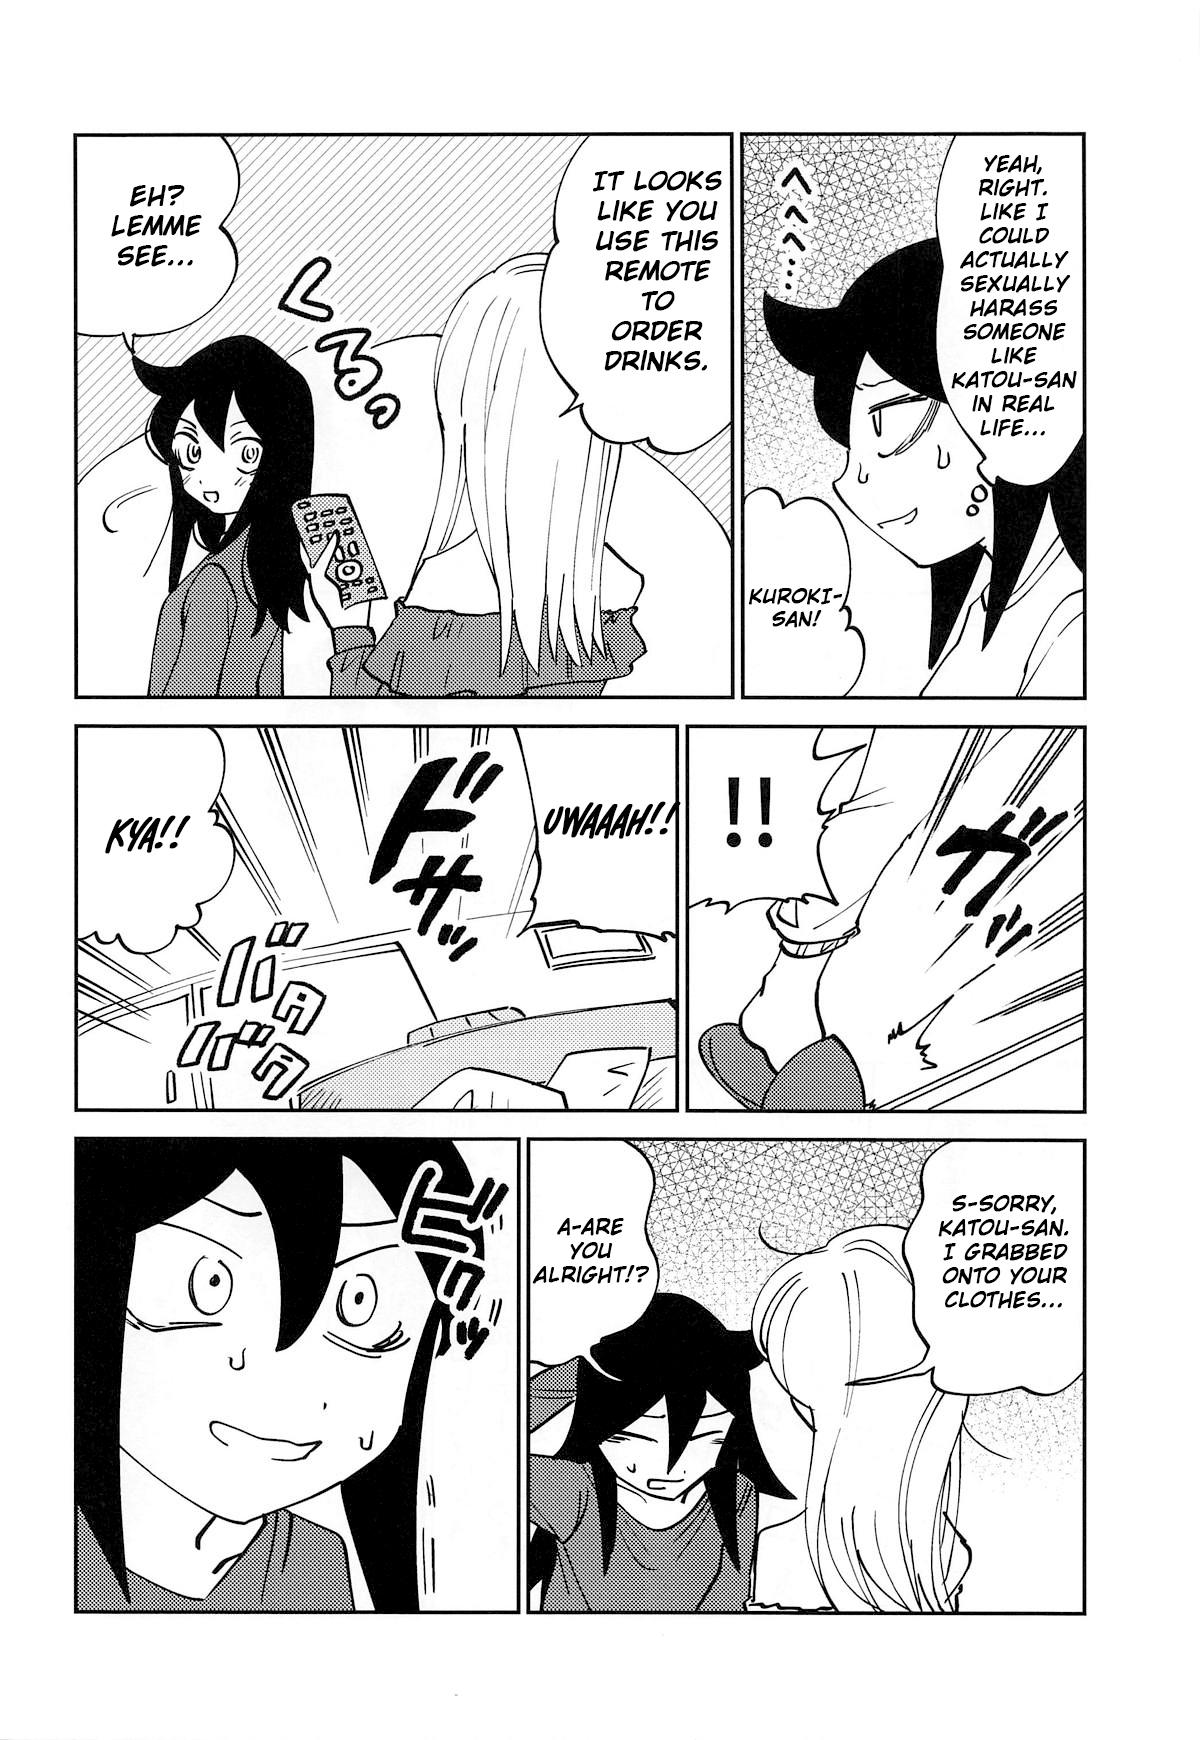 Argenta Kuroki-san, Anone. - Its not my fault that im not popular Naked - Page 9